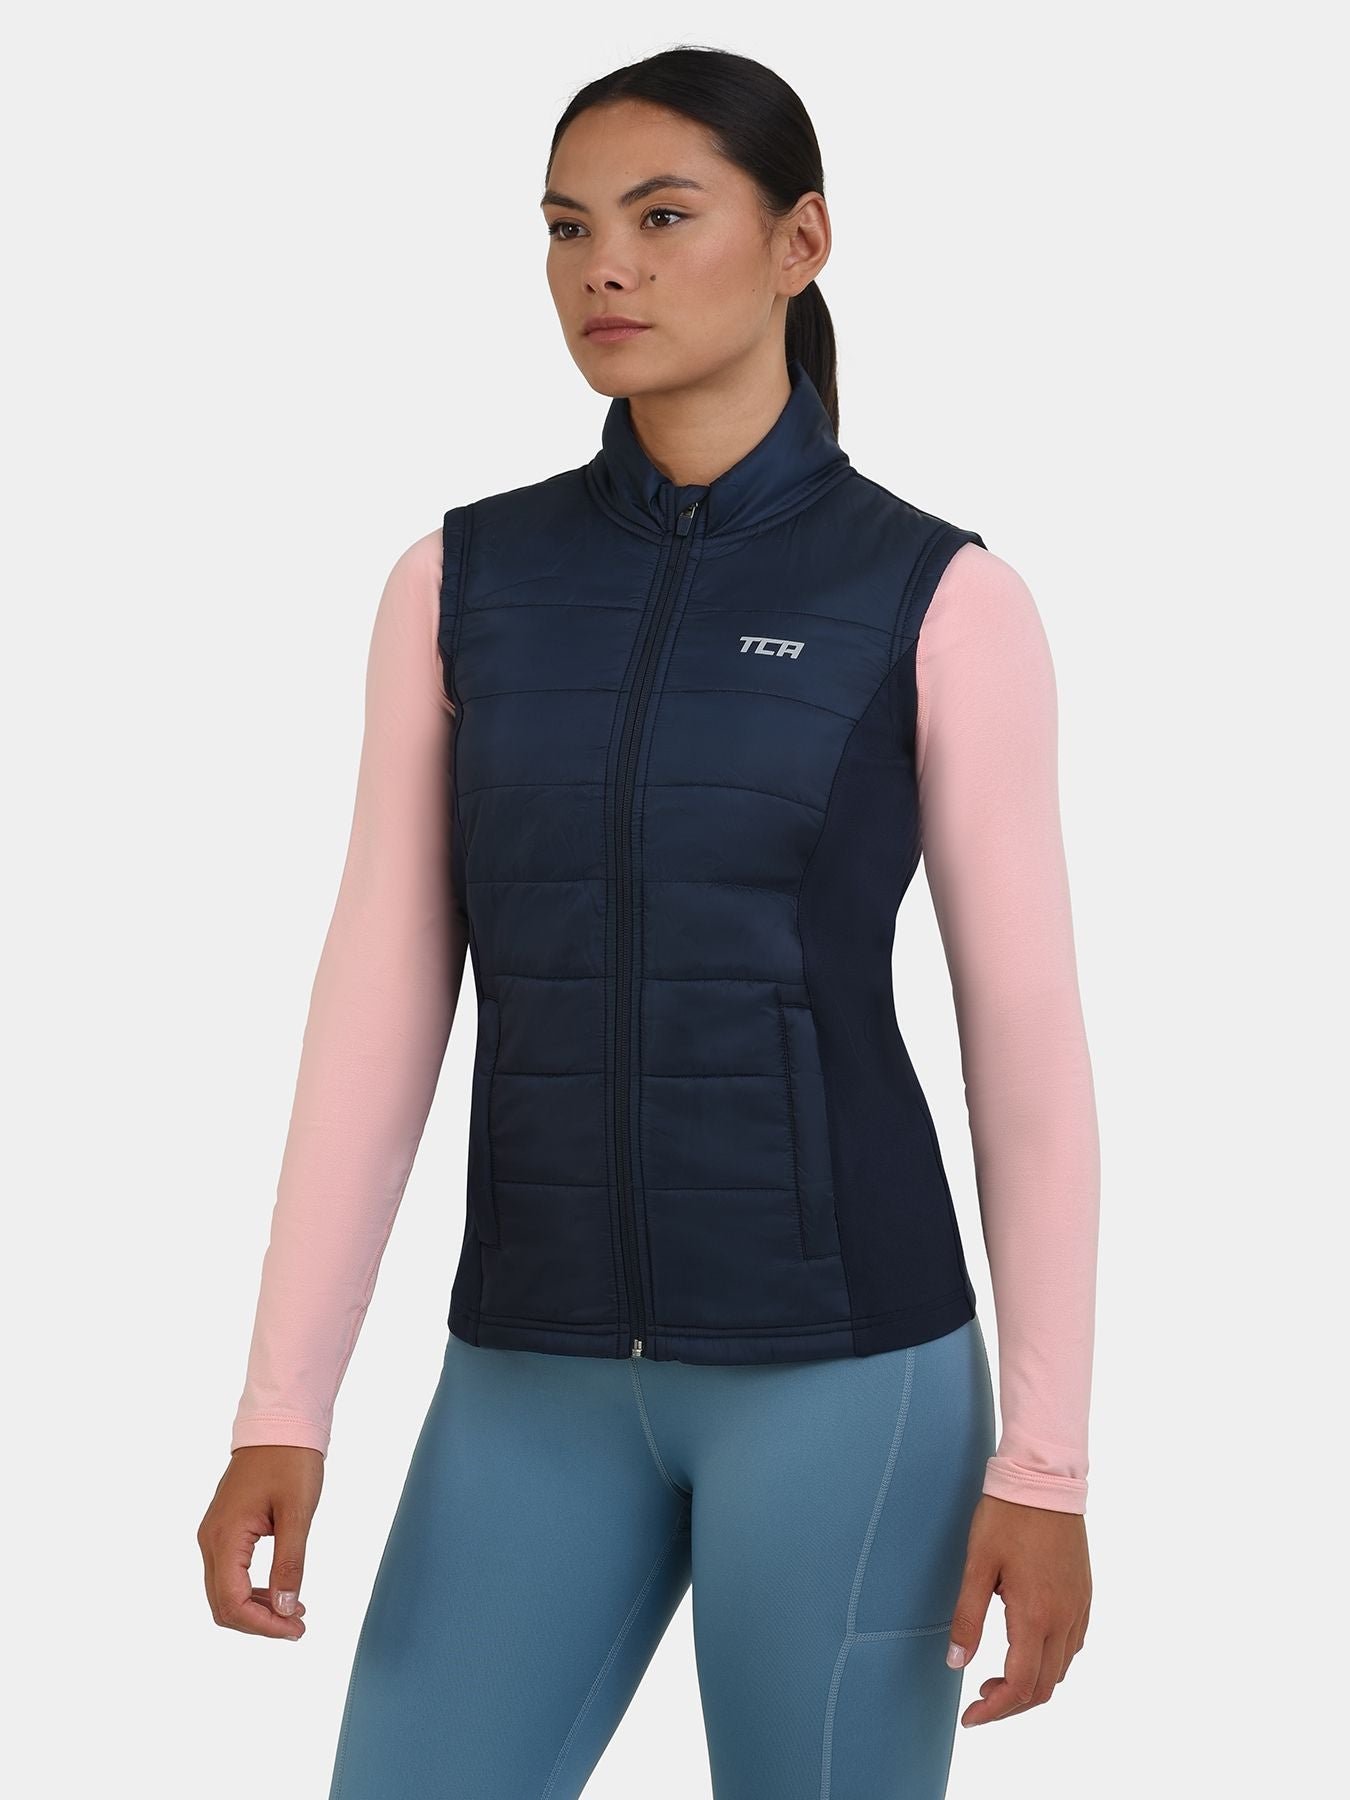 Excel Padded Running Gilet For Women With Zip Pockets & Reflective Strips